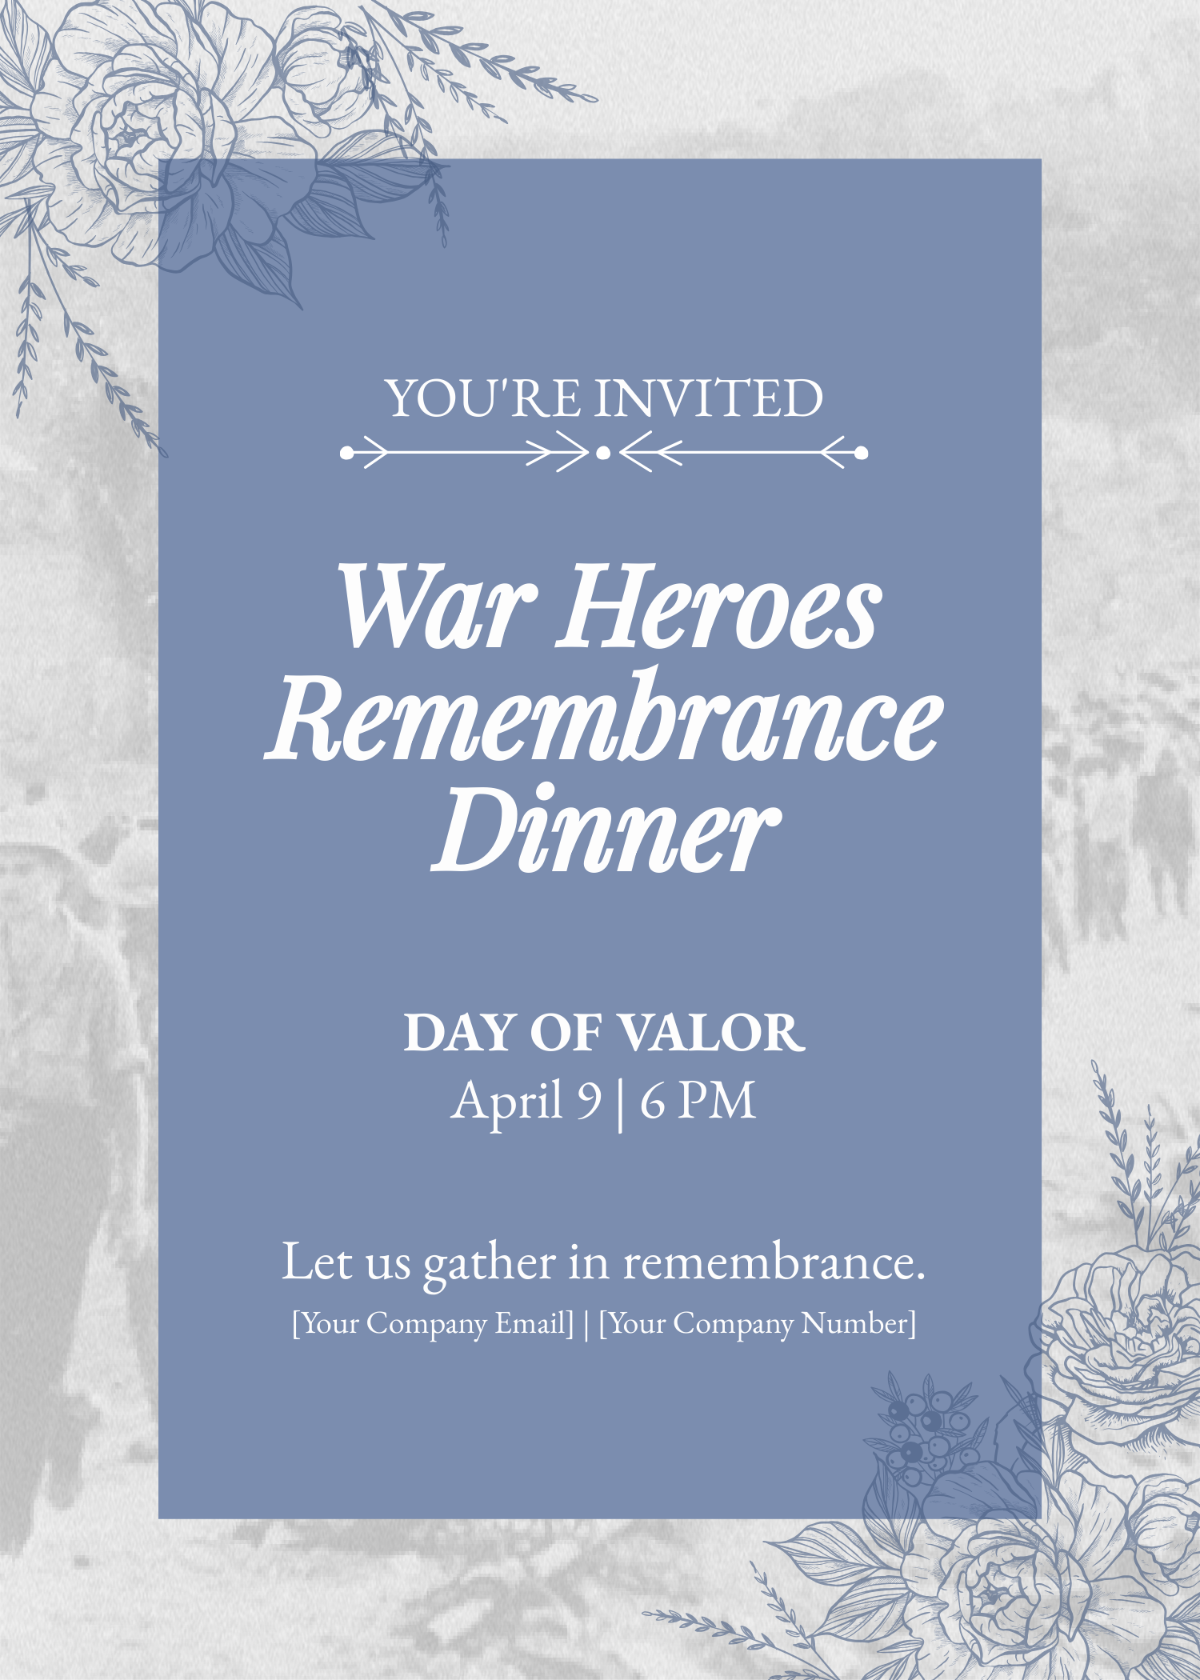  Day of Valor  Invitation Card Template